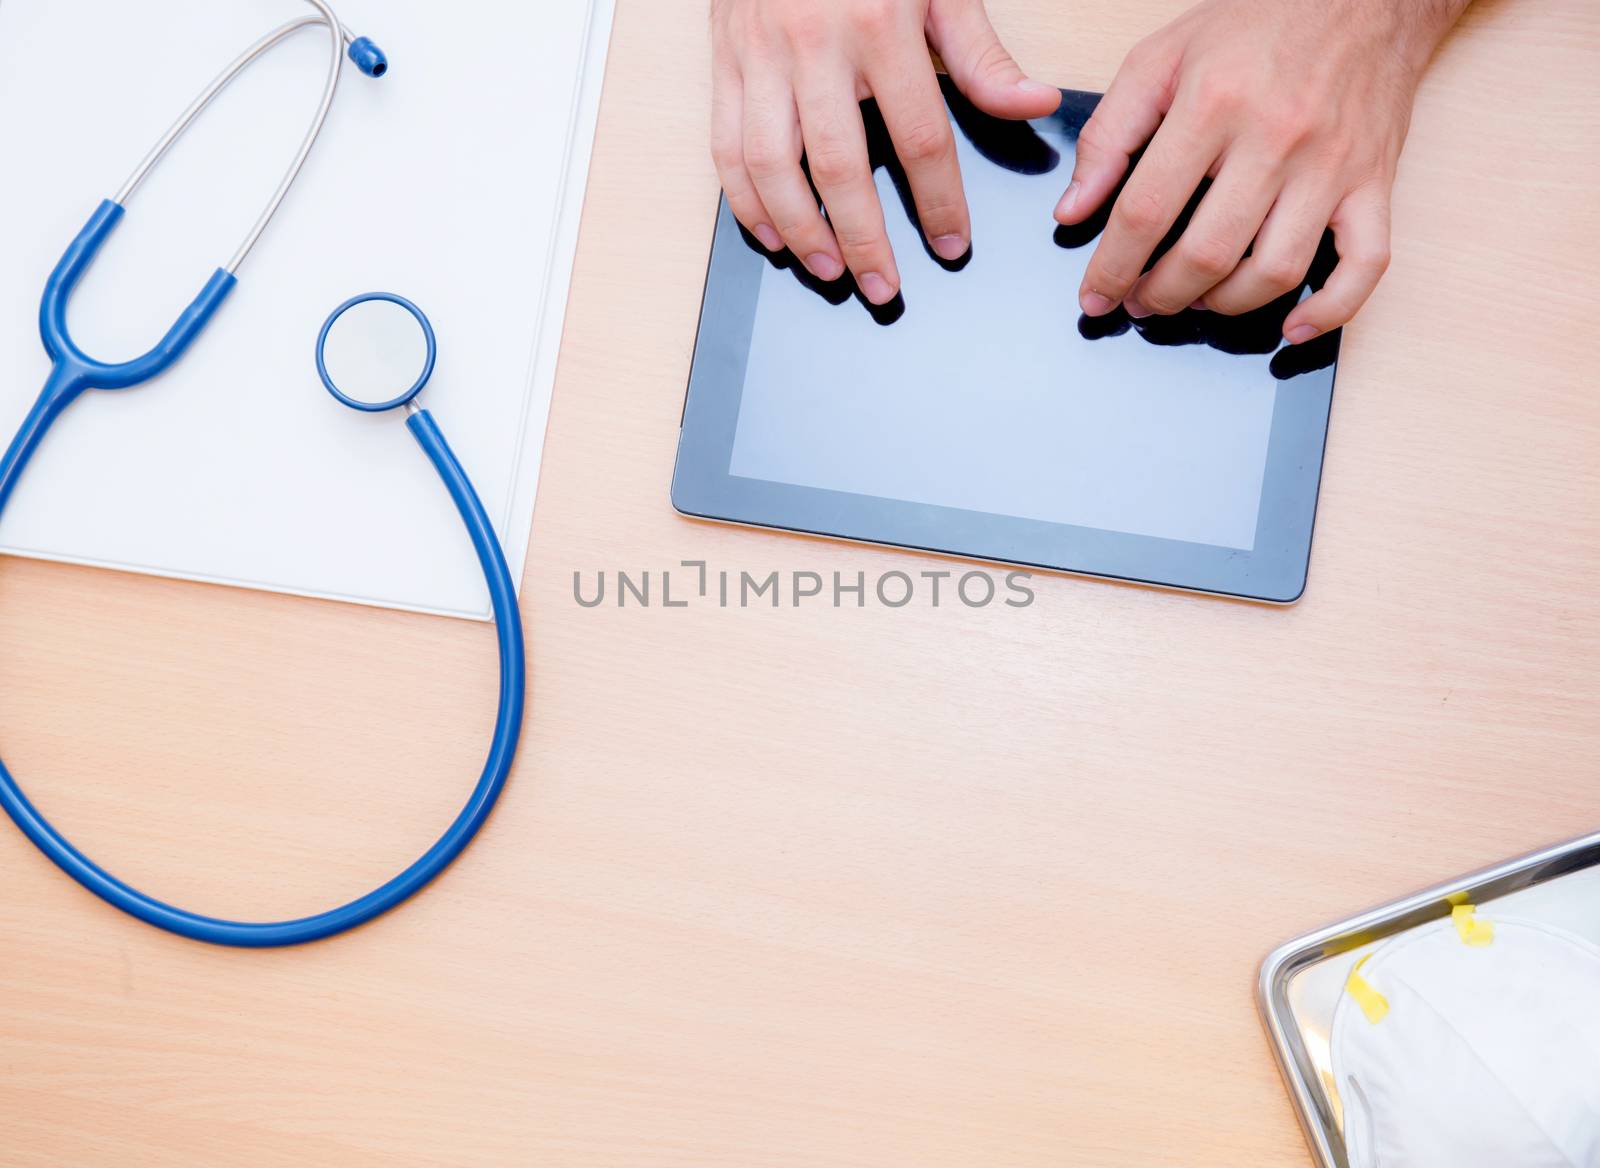 male doctor with tablet computer and stethoscope at the desk on white background - top view.